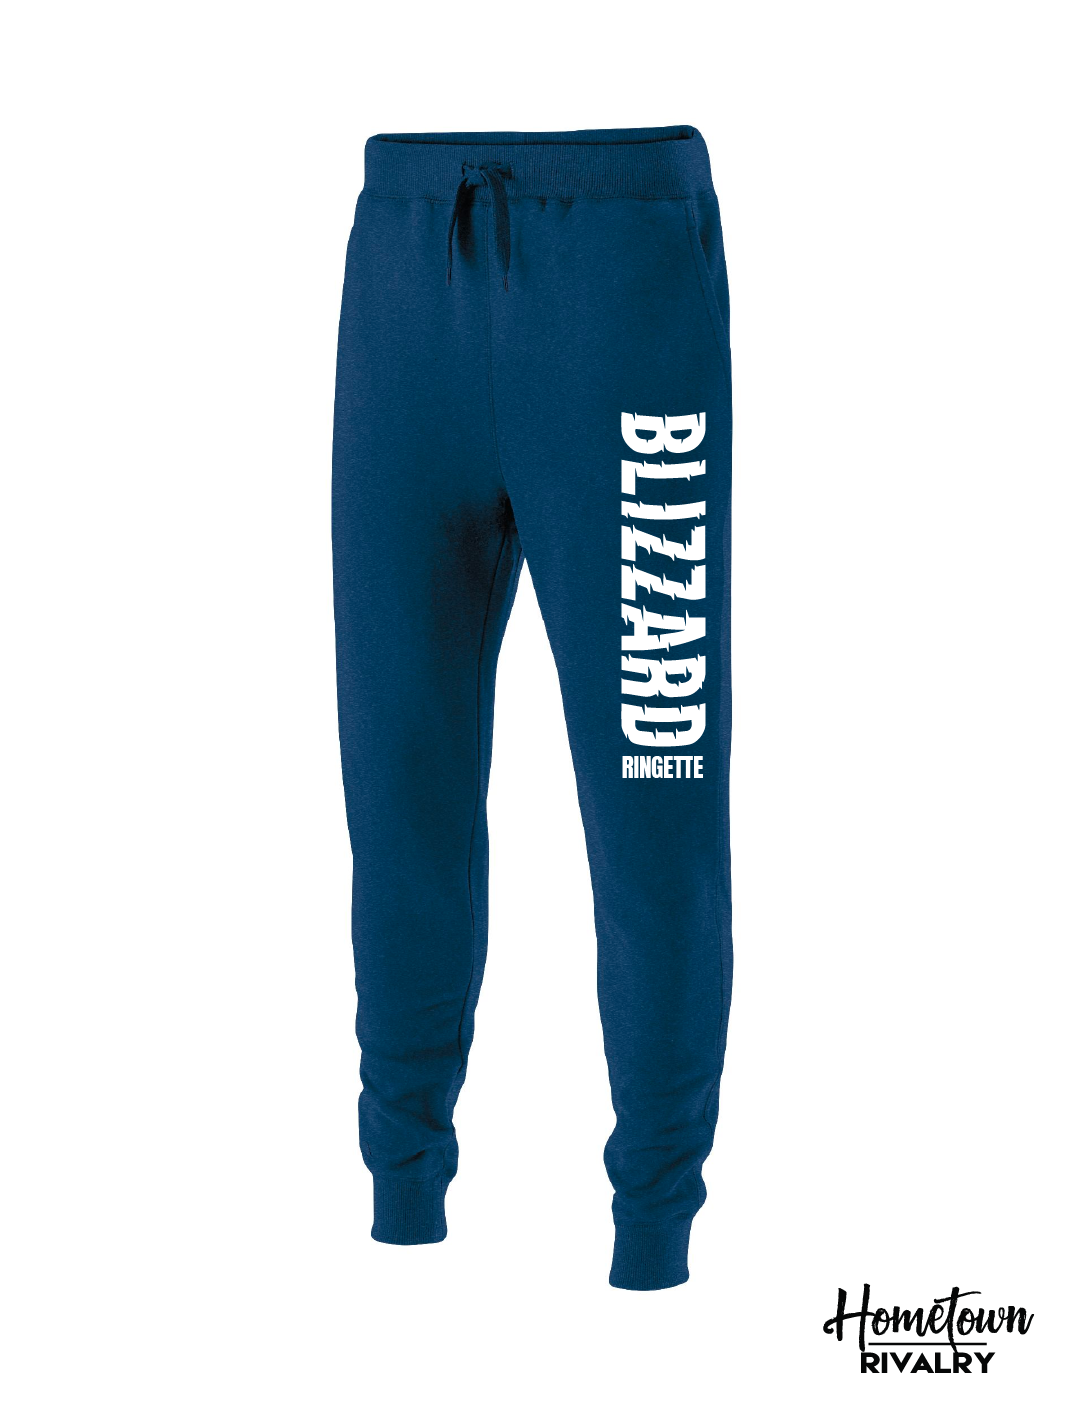 Barrie Blizzard Ringette Essential Jogger-Youth